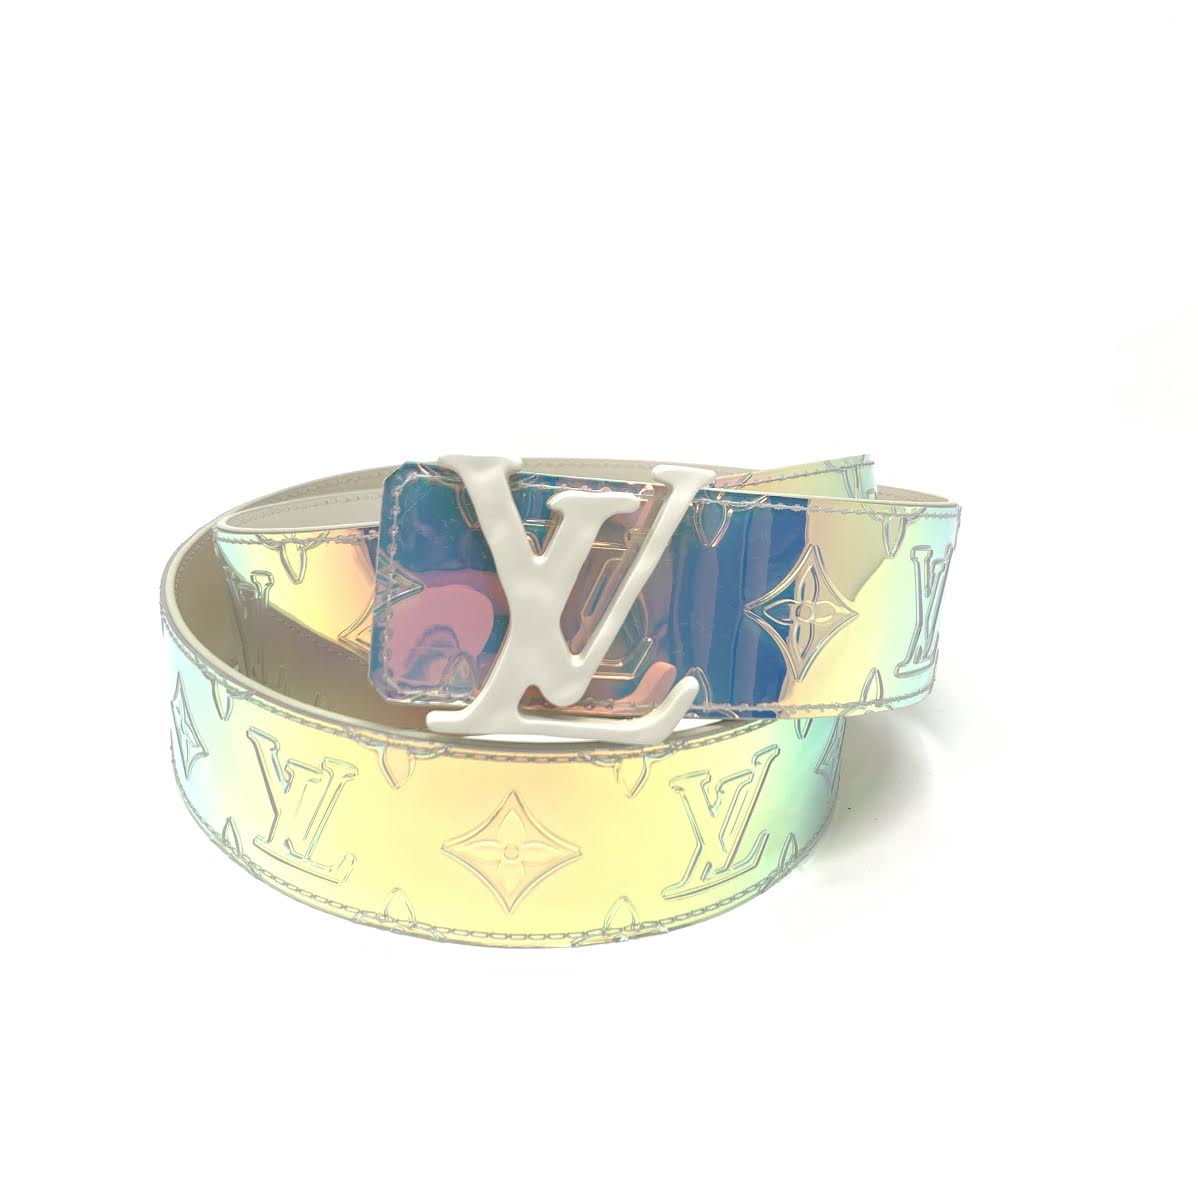 Louis Vuitton Prism - 13 For Sale on 1stDibs